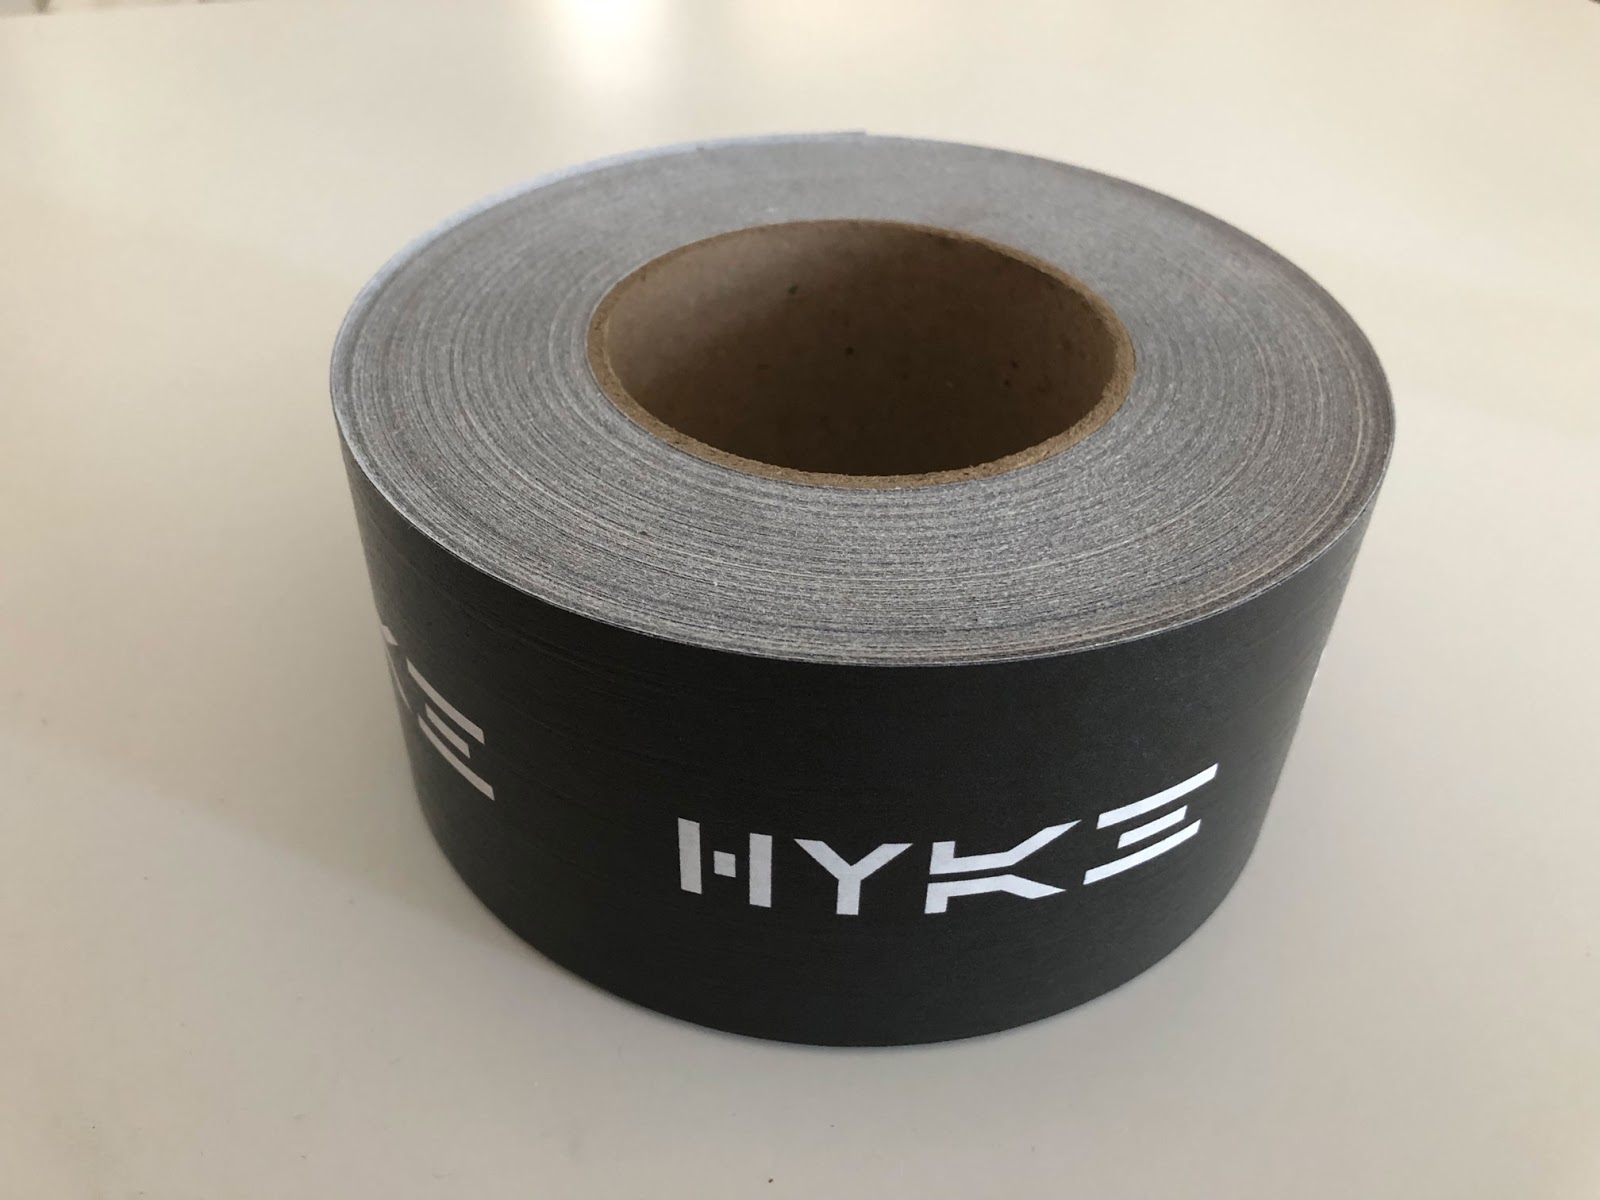 Picture showing HYKE branded tape